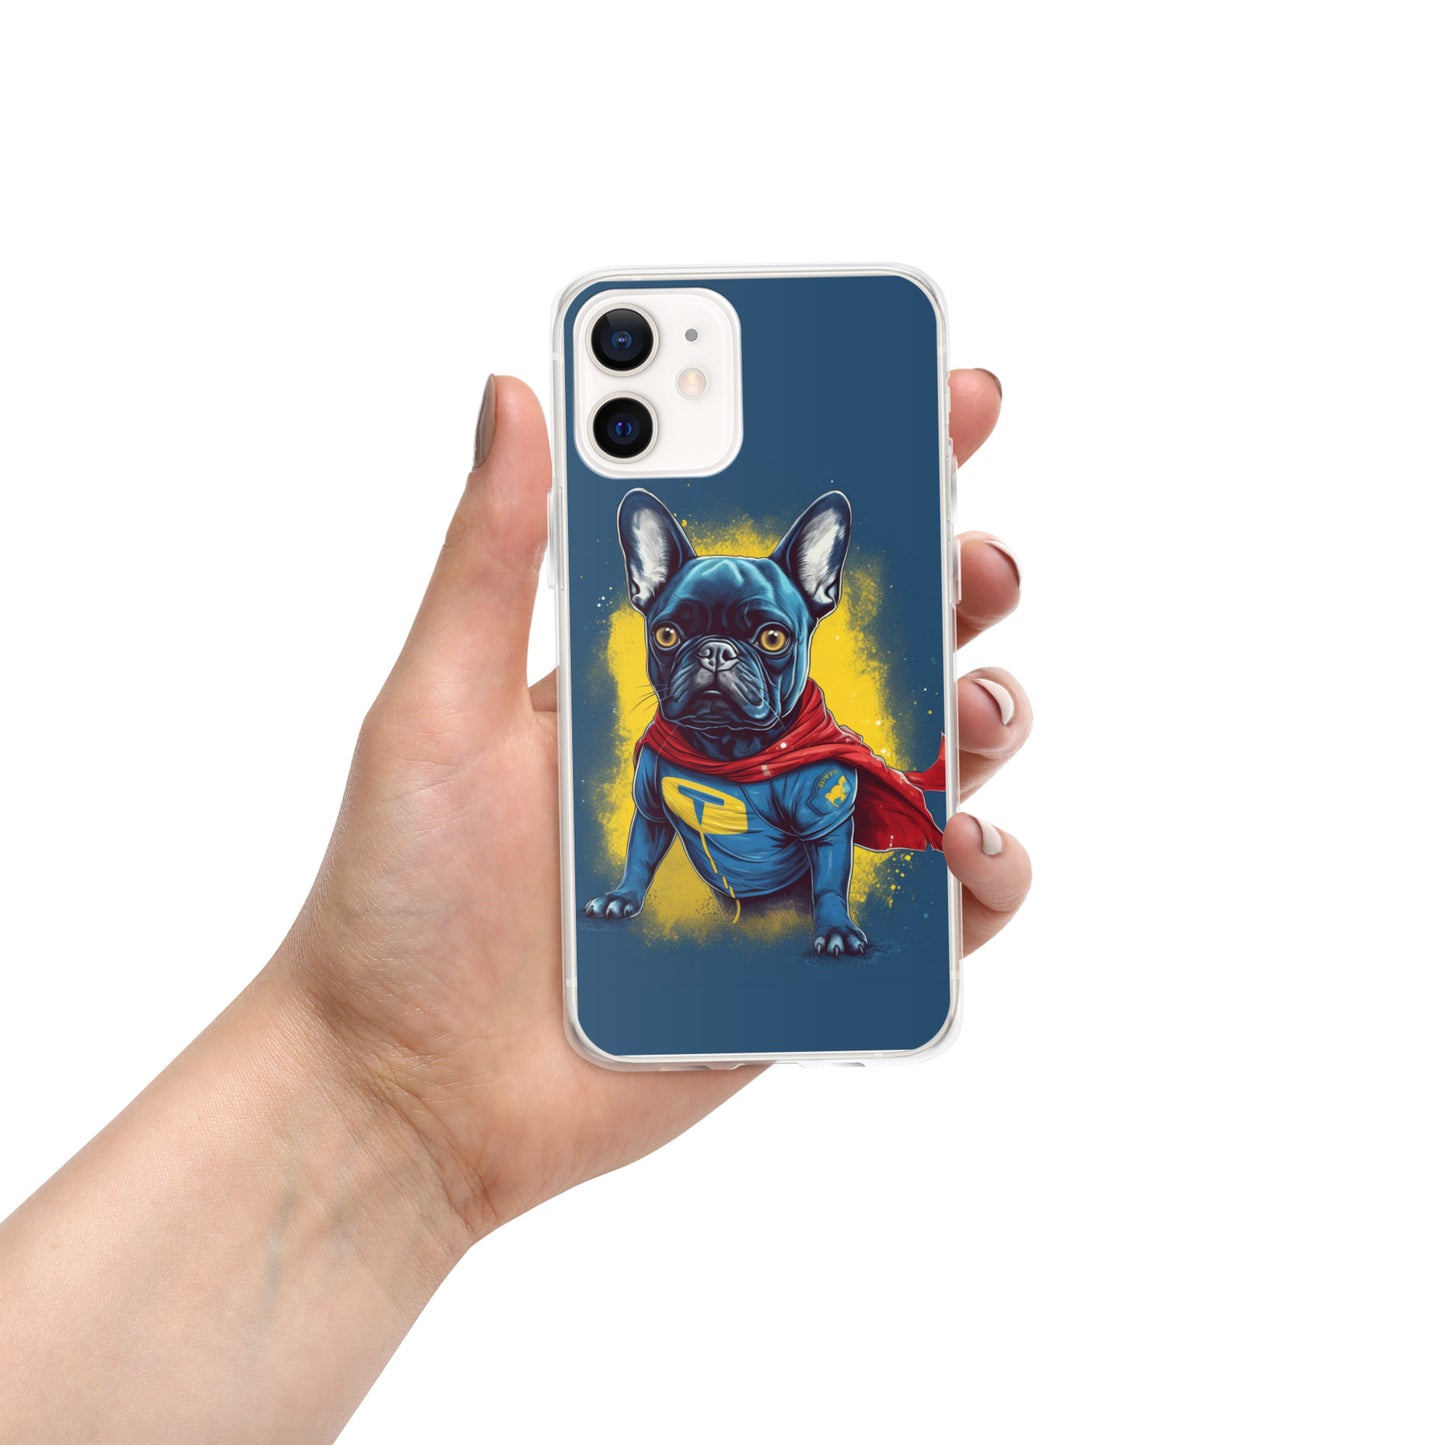 French Bulldog iPhone Case - Stylish and Protective Accessory for Frenchie Lovers